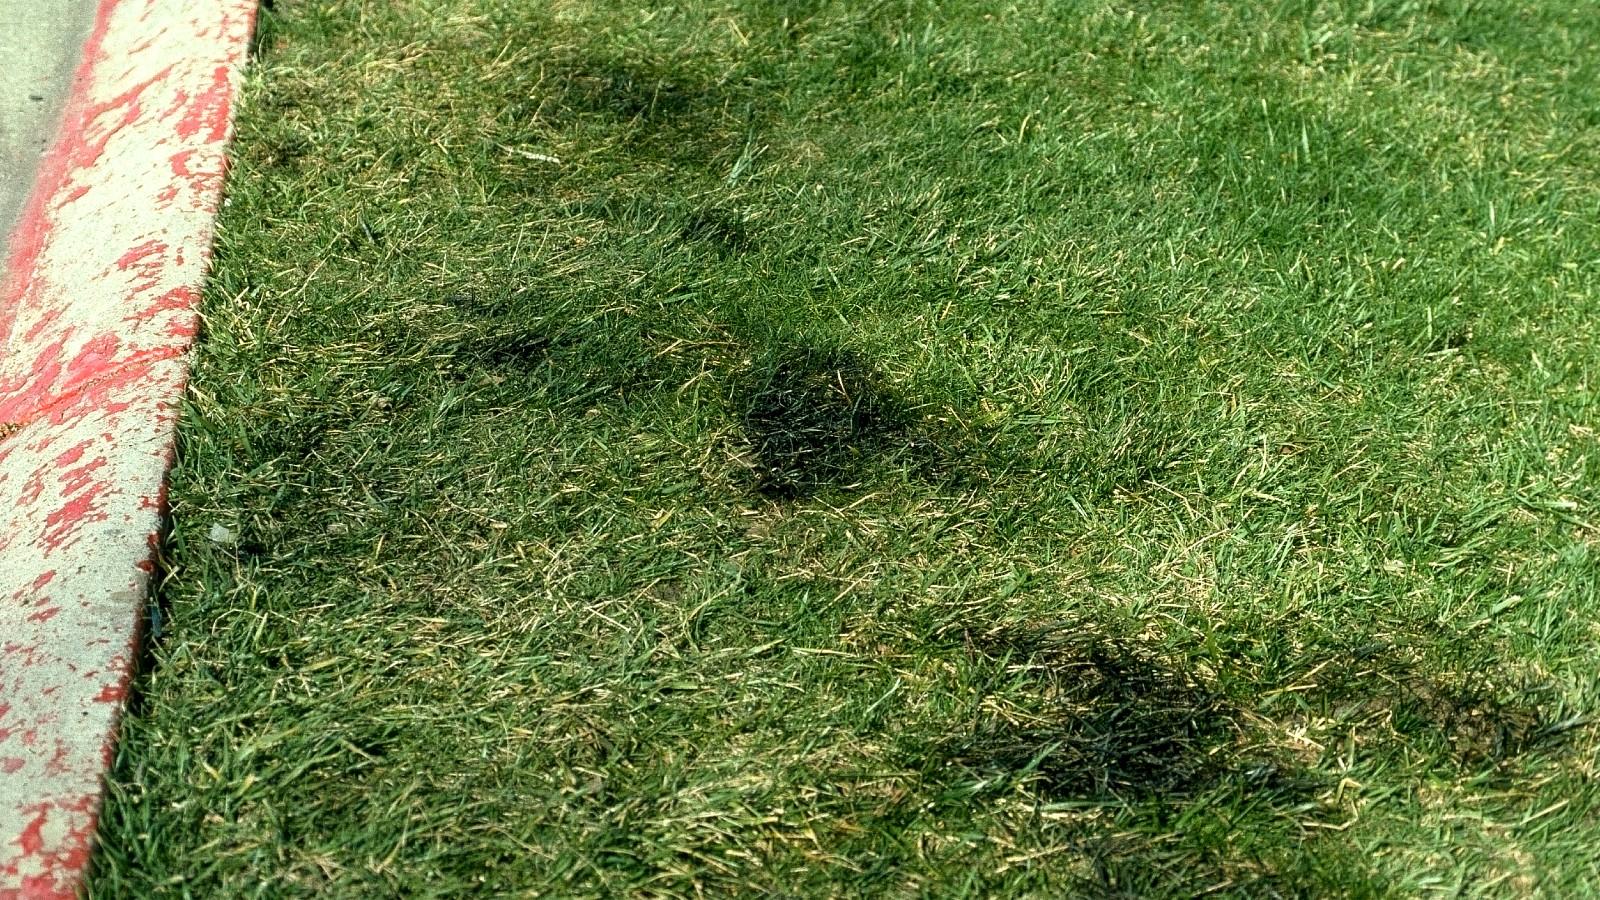 lawn damaged by oil spill